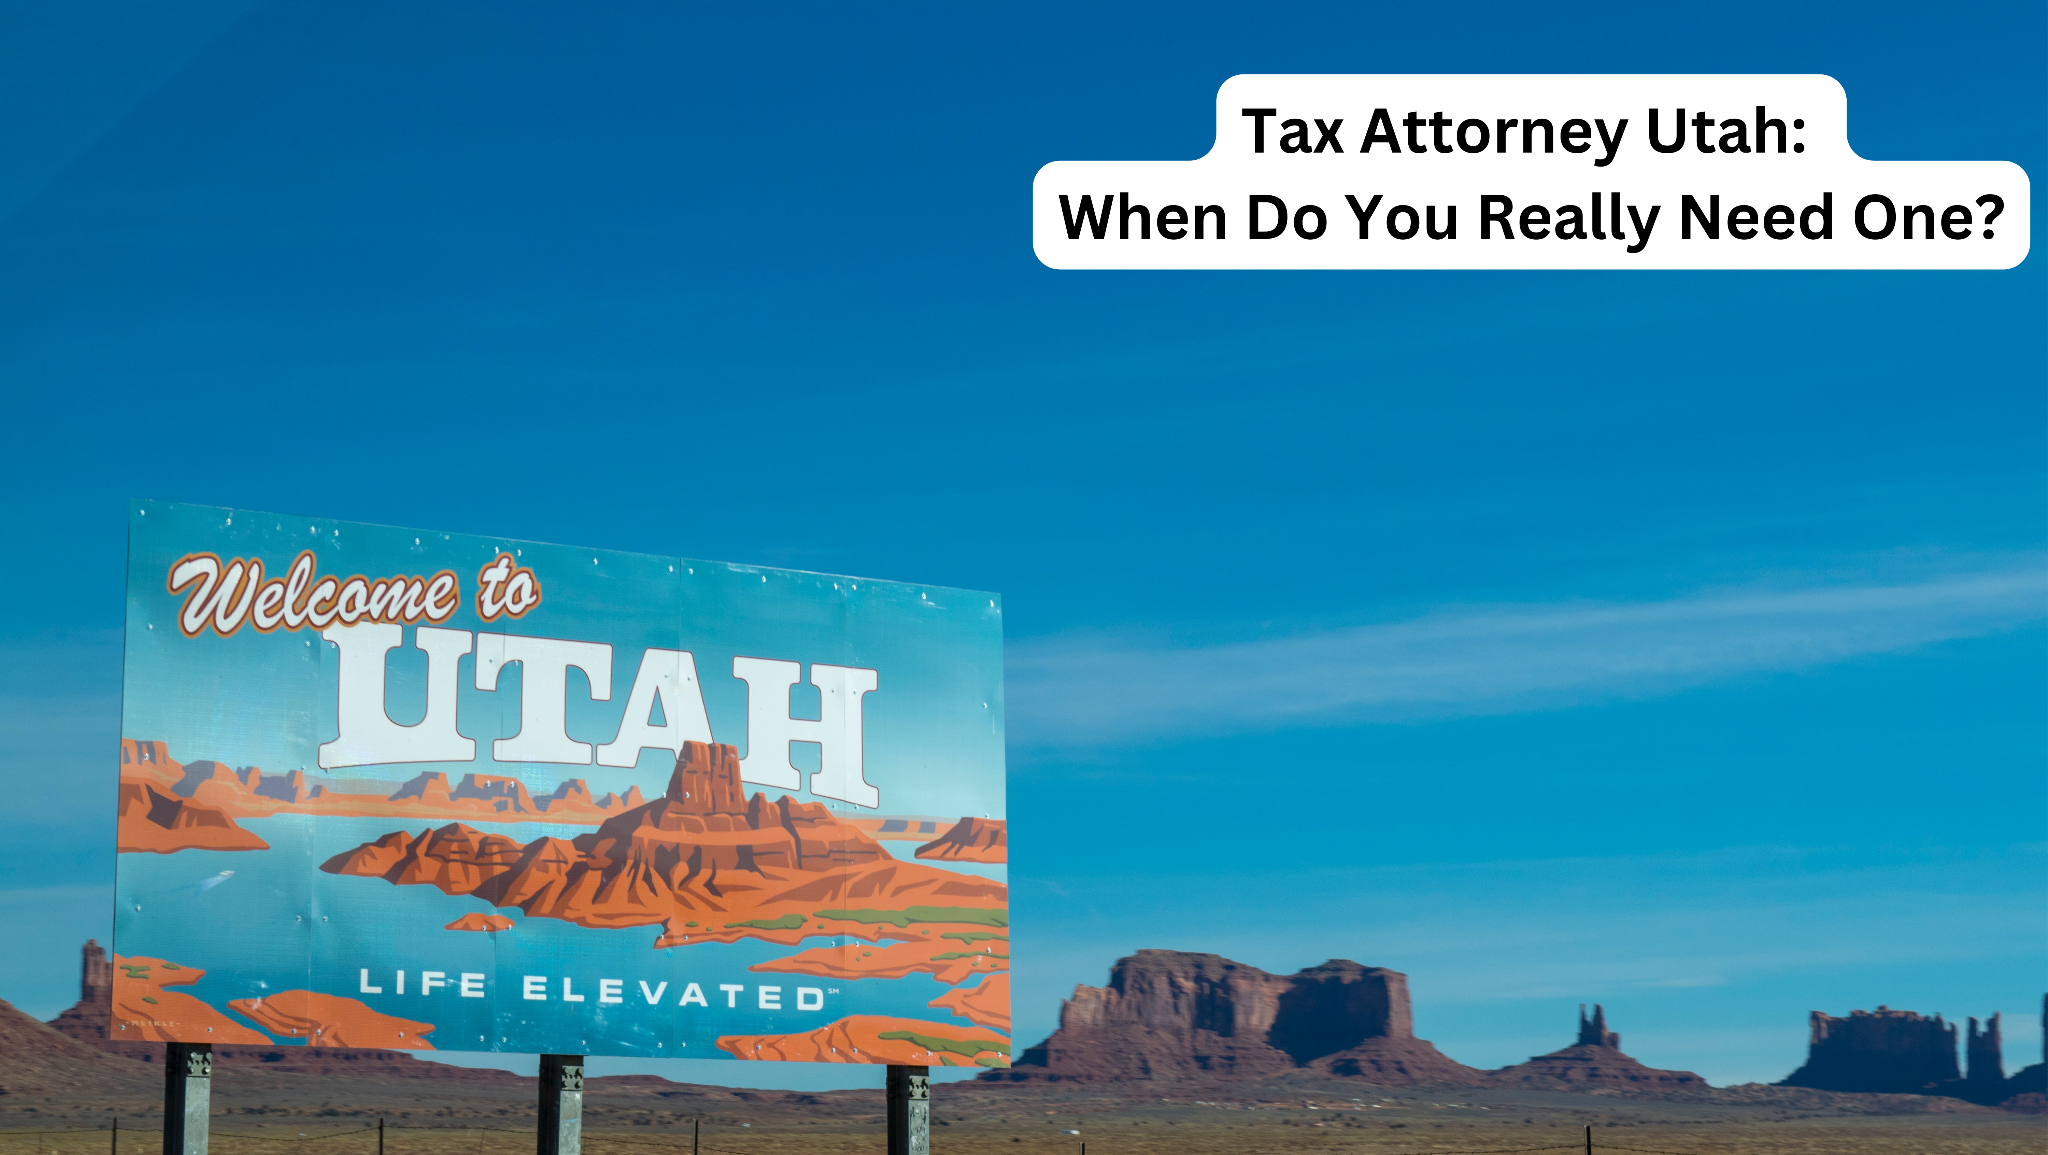 Tax Attorney Utah: When Do You Really Need One?